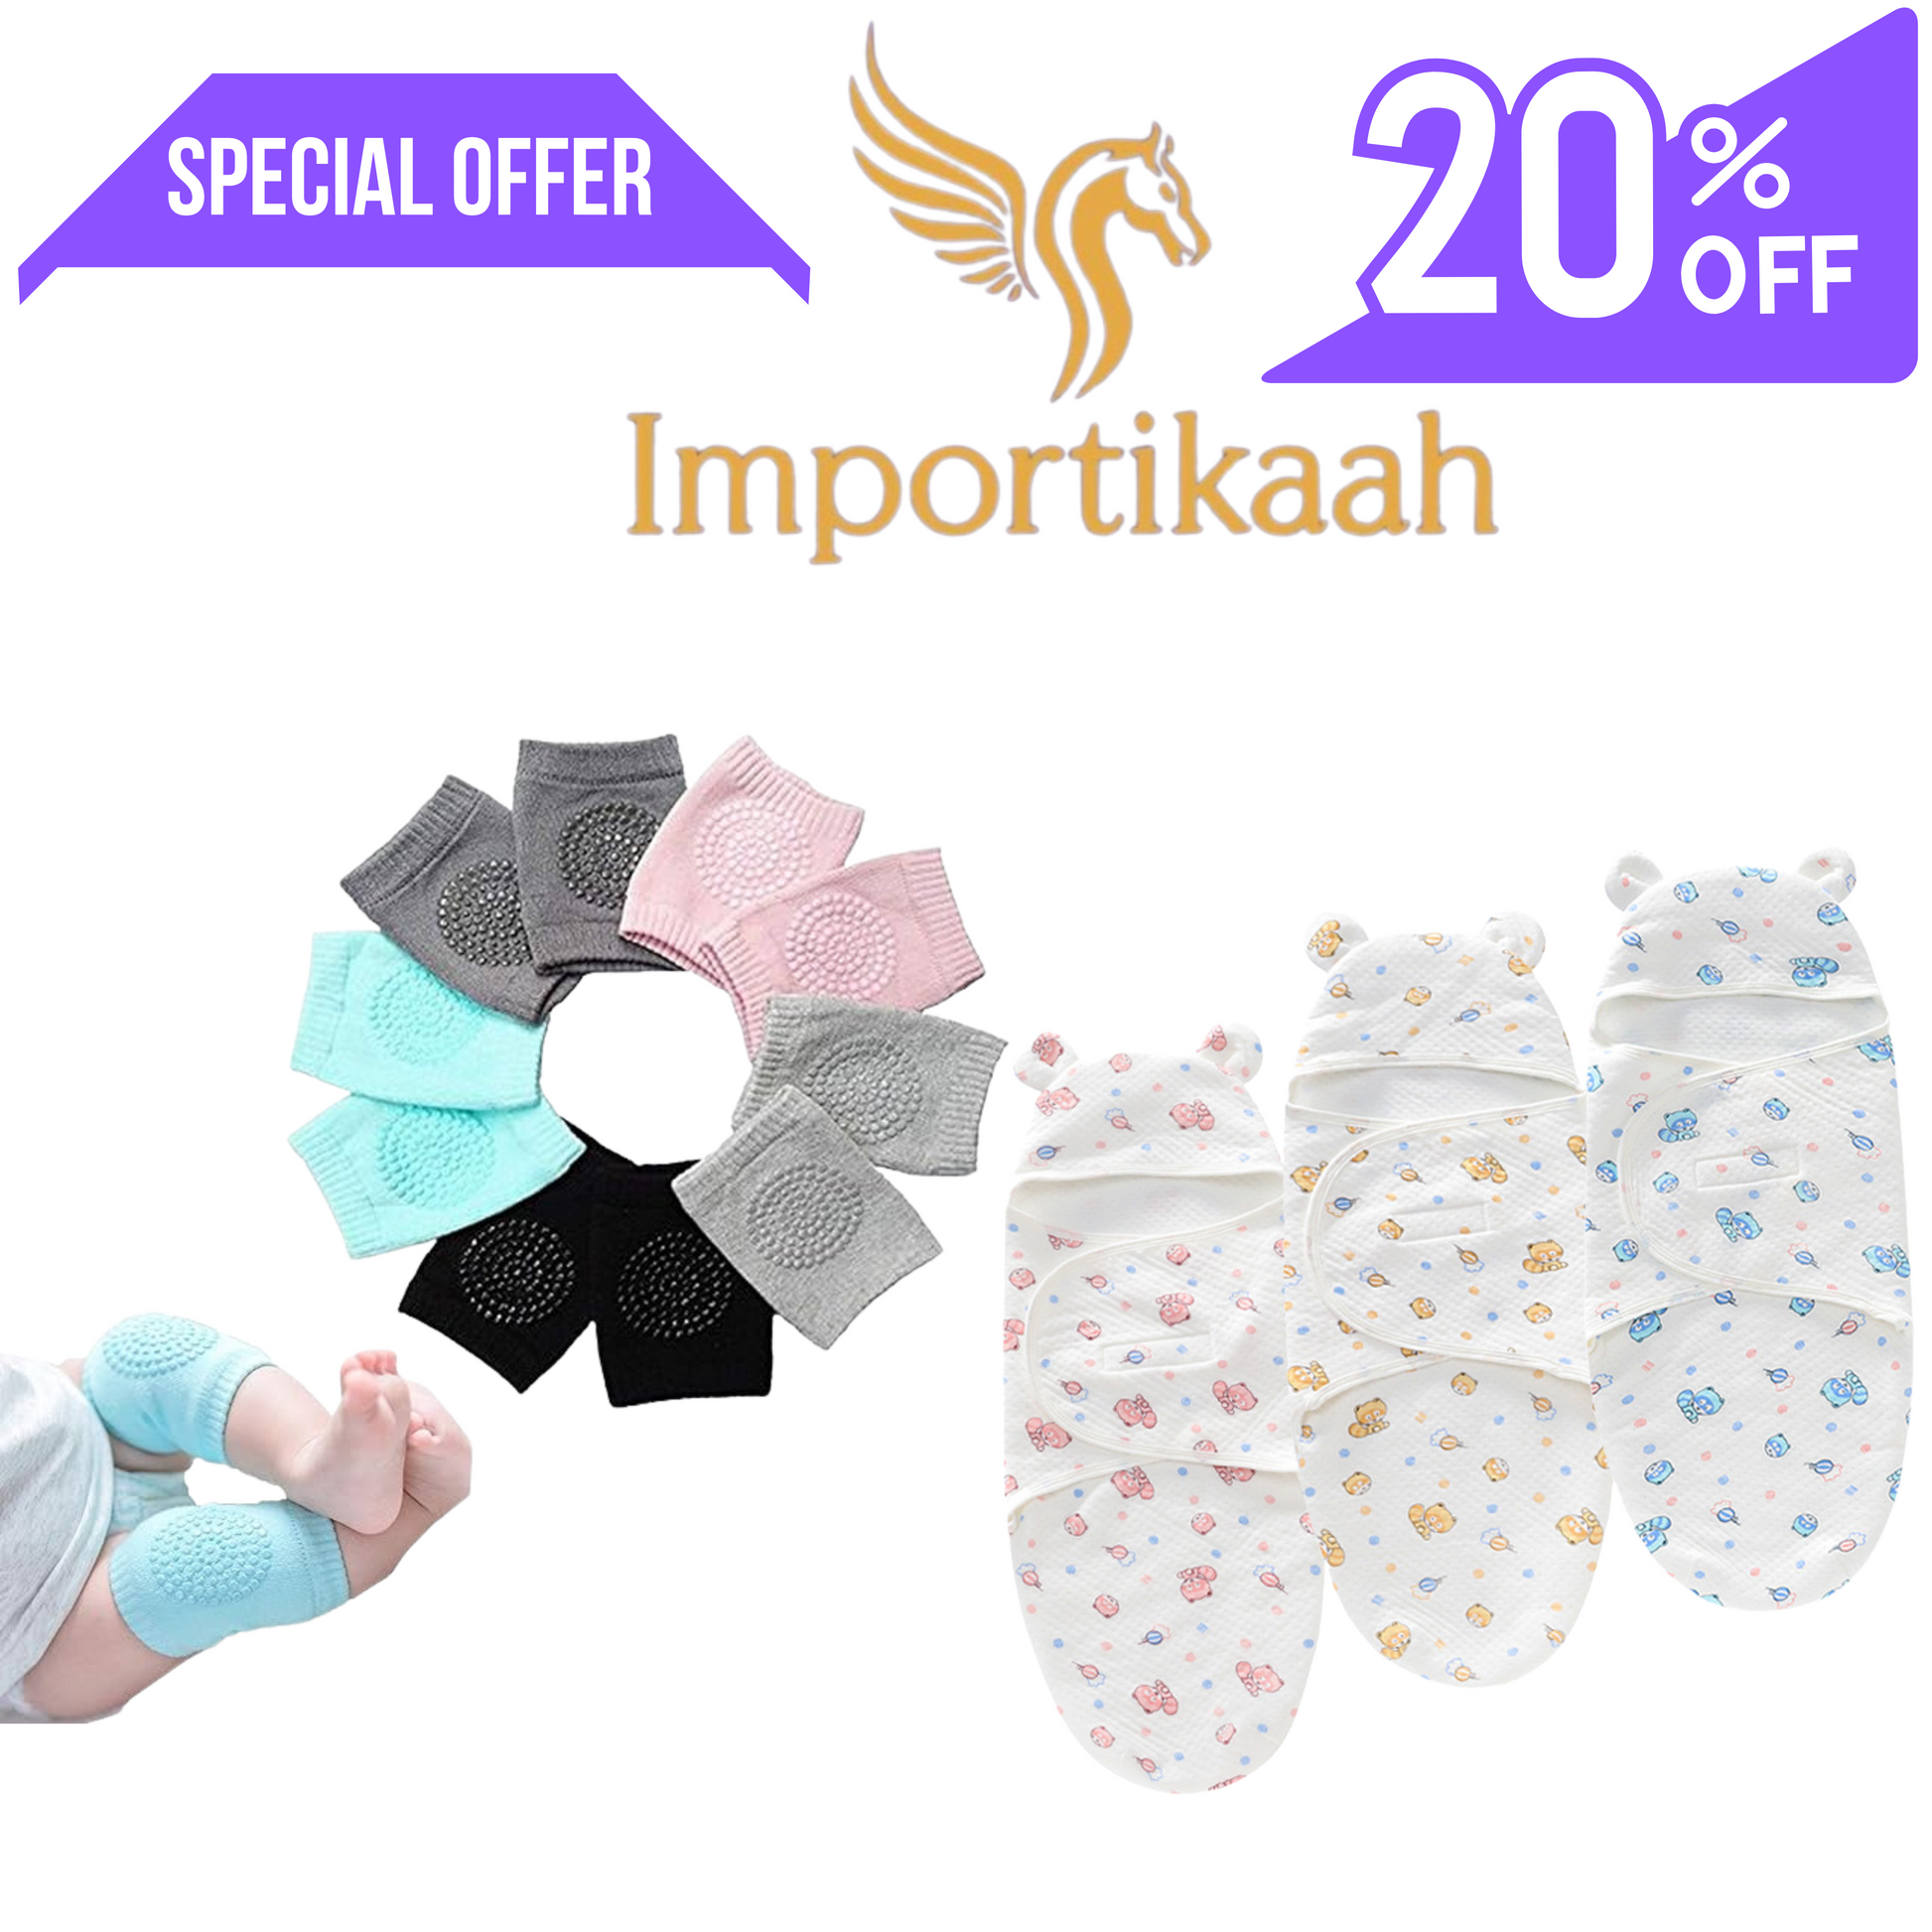 Importikaah-Baby-Knee-Pads-Set-of-2-Pairs-for-Crawling-Protection